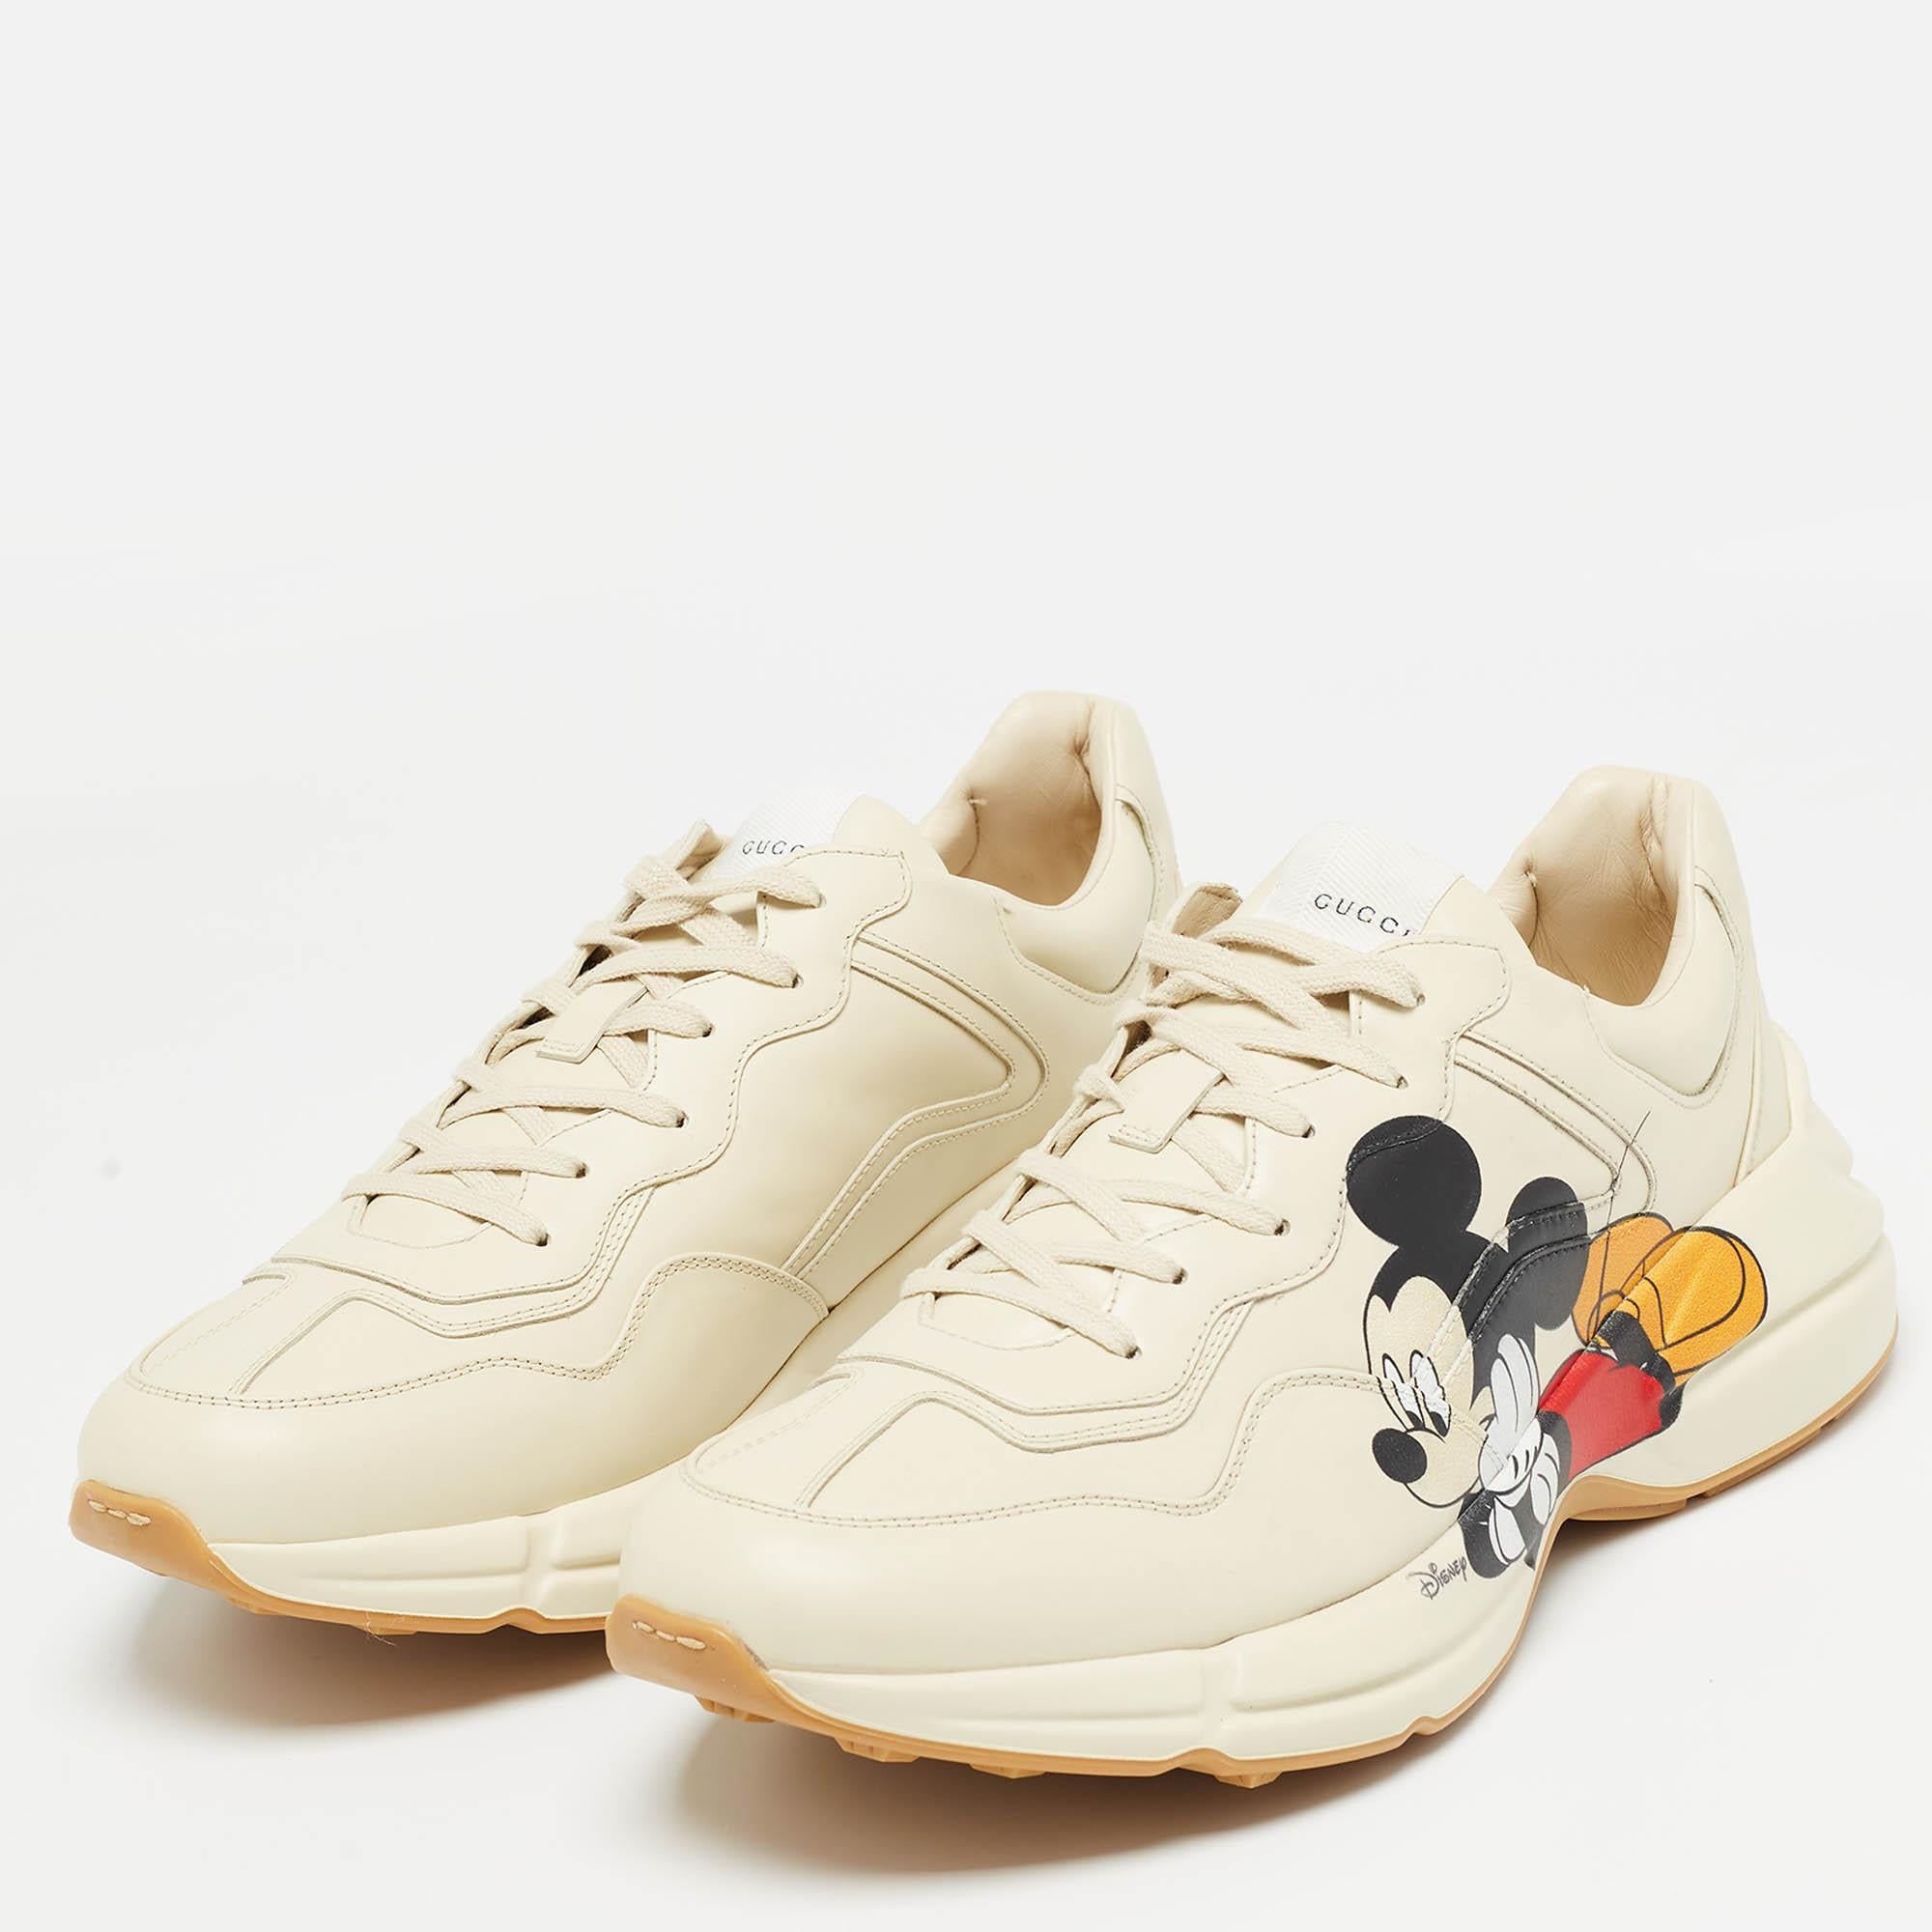 Gucci x Disney Cream Leather Mickey Mouse Rhyton Sneakers Size 47 For Sale 2